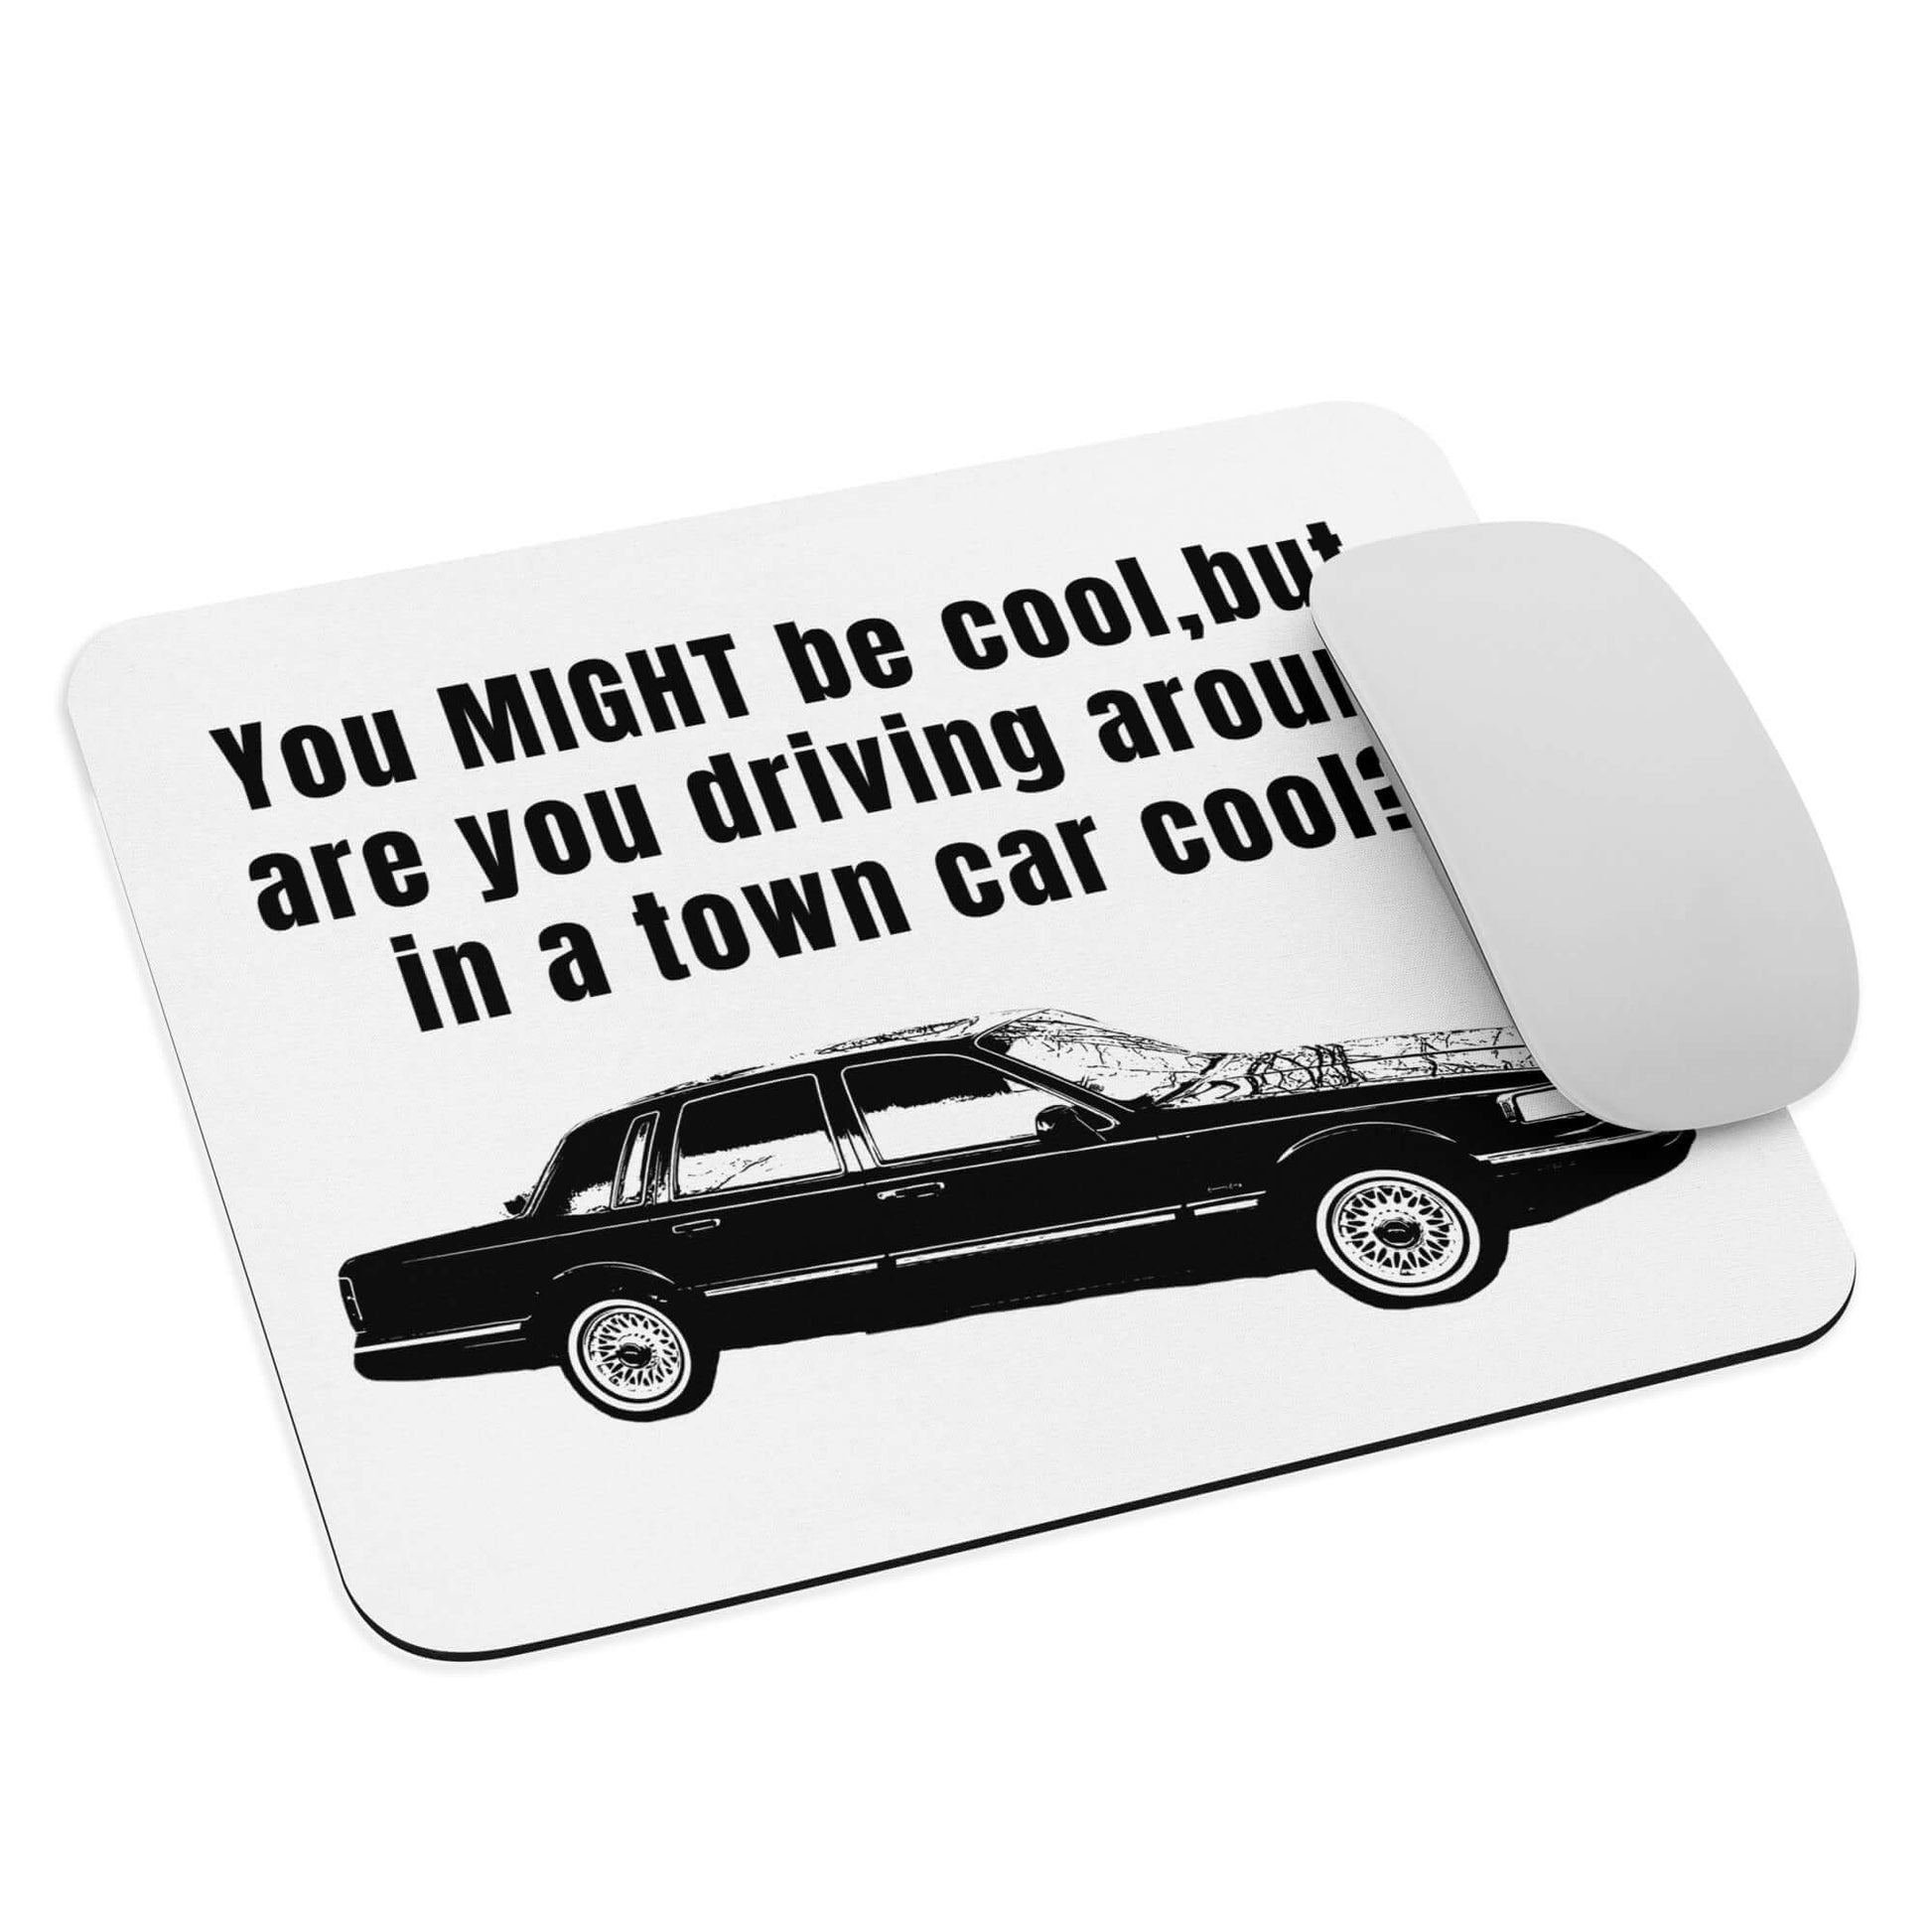 You MIGHT be cool, but are you driving around in a town car cool? - Mouse pad ford mercury mouse pad panther panther mafia town car